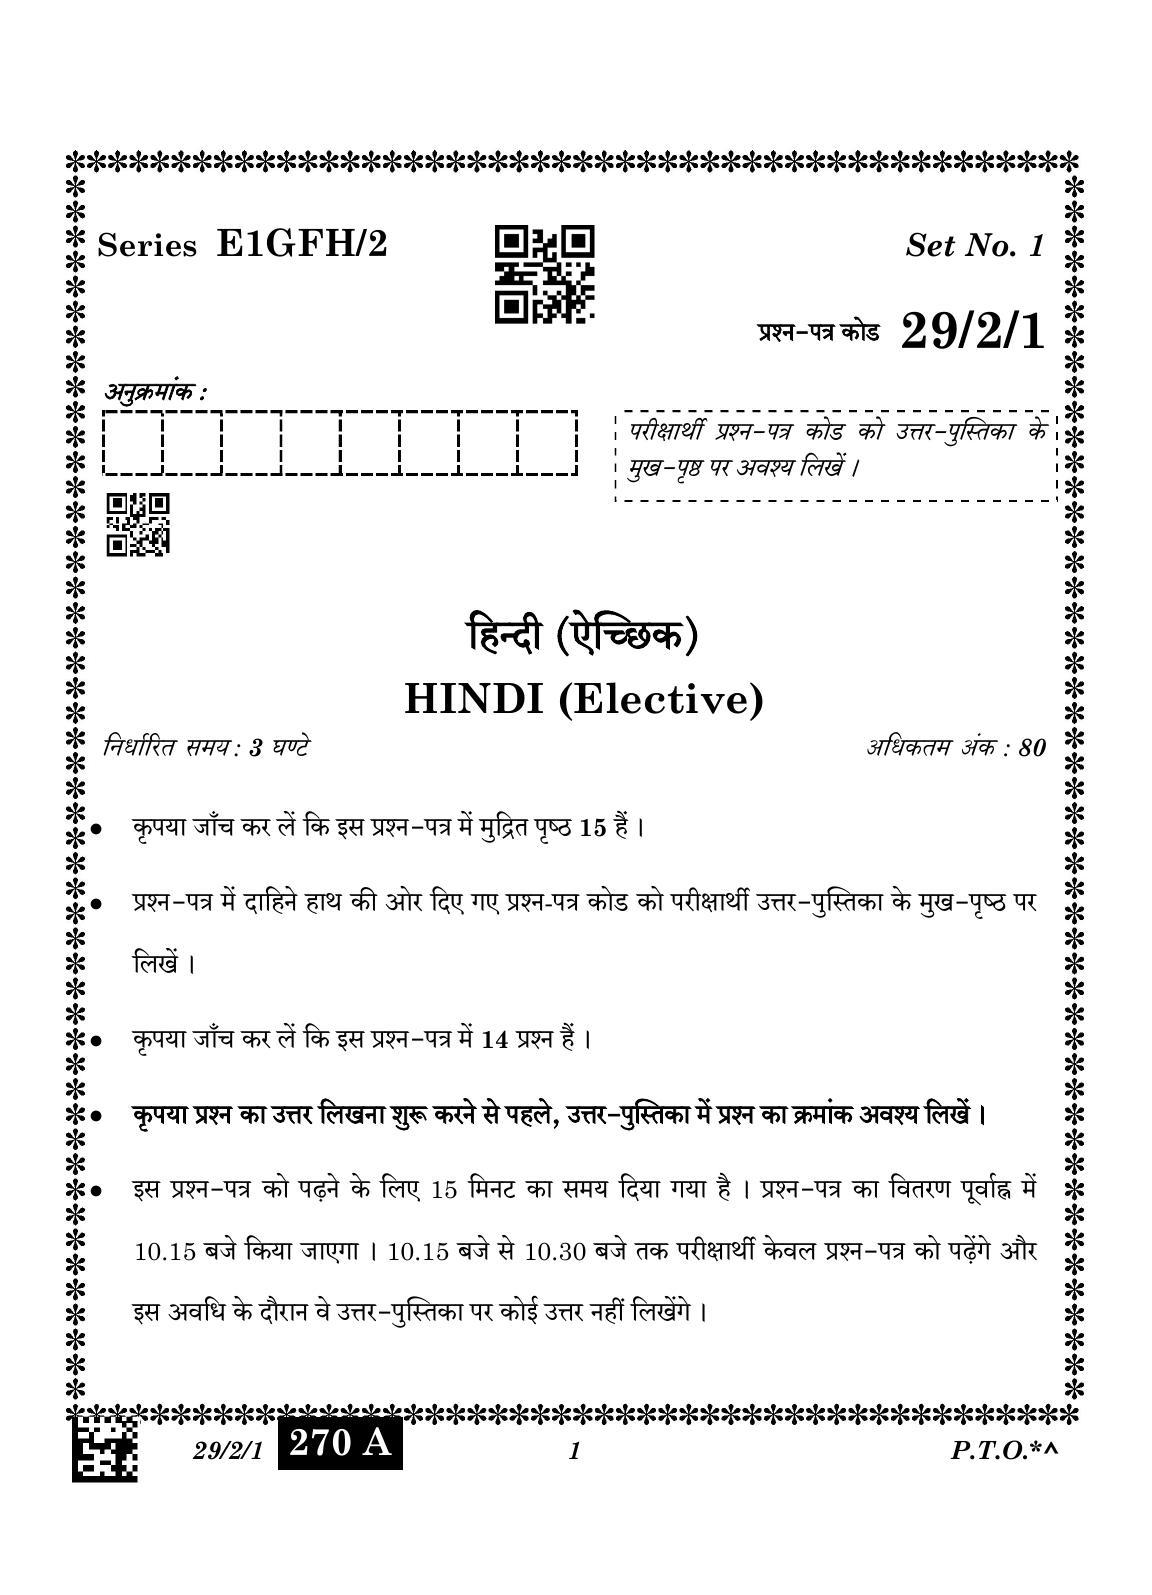 CBSE Class 12 29-2-1 Hindi Elective 2023 Question Paper - Page 1